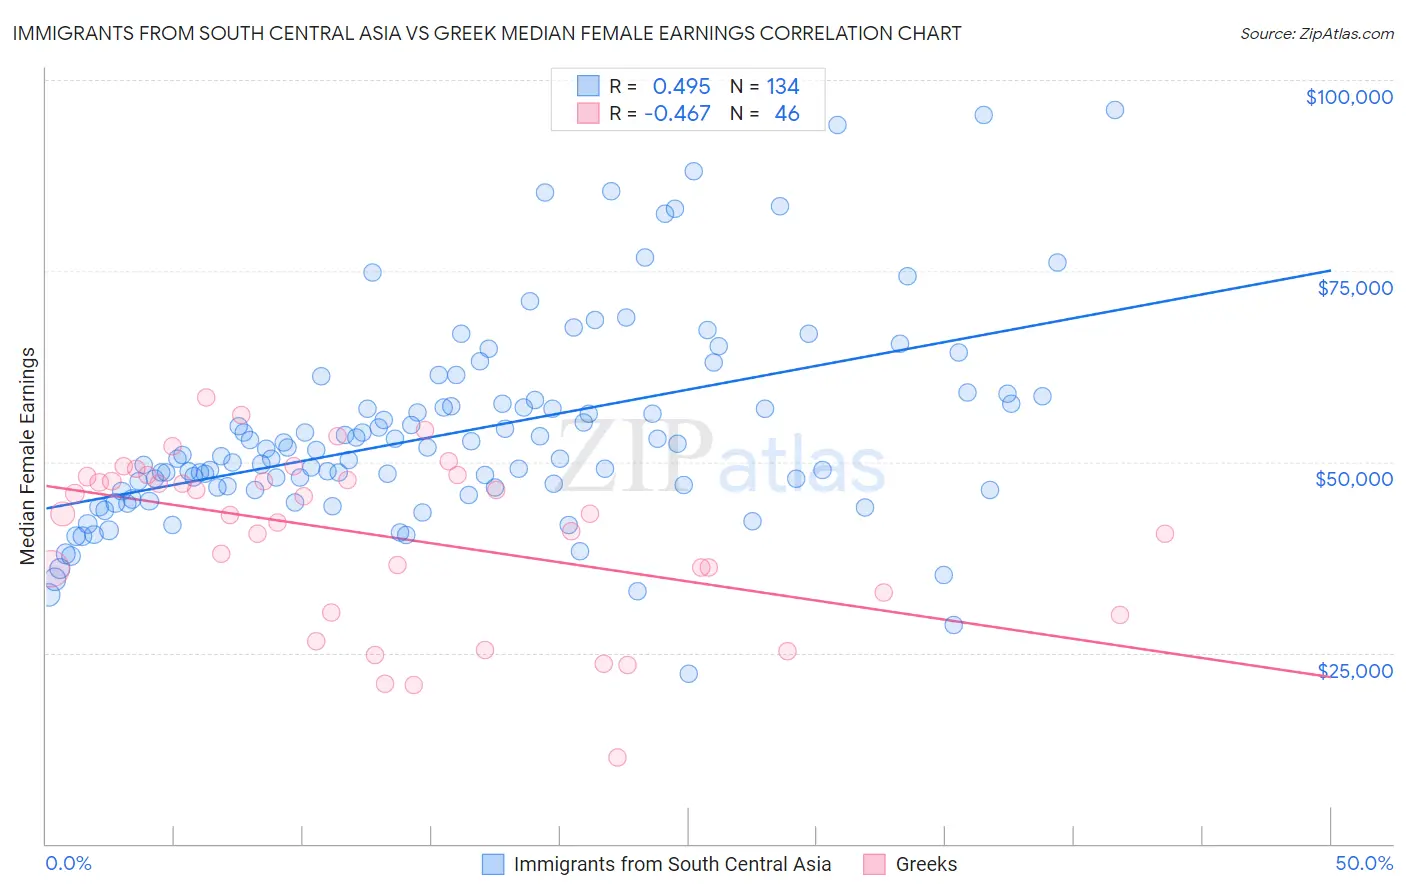 Immigrants from South Central Asia vs Greek Median Female Earnings